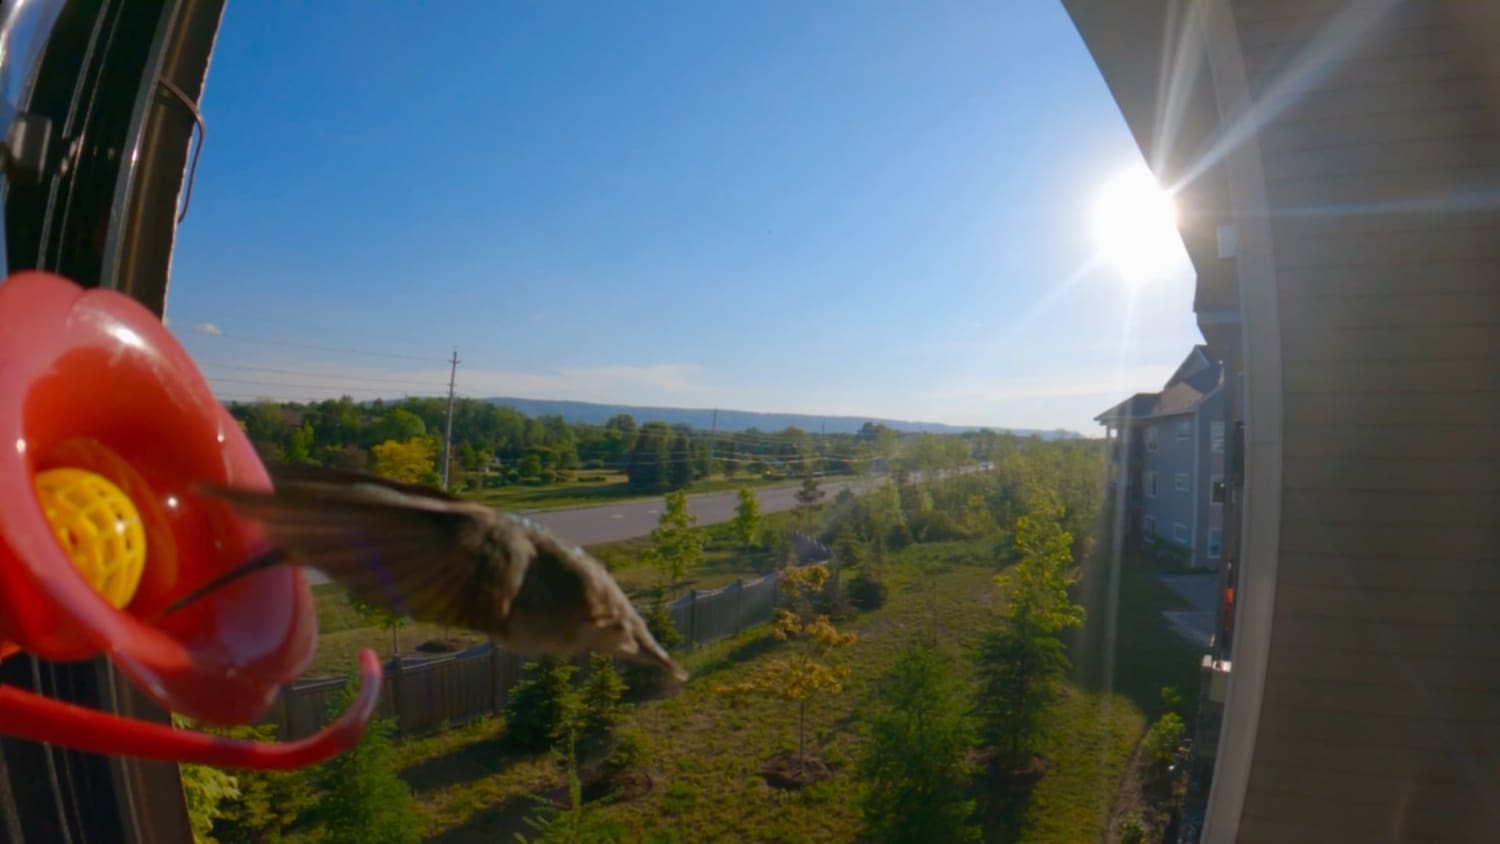 Filmed this hummingbird today with the new GoPro motion detection, it’s amazing how fast they fly even in slow motion!